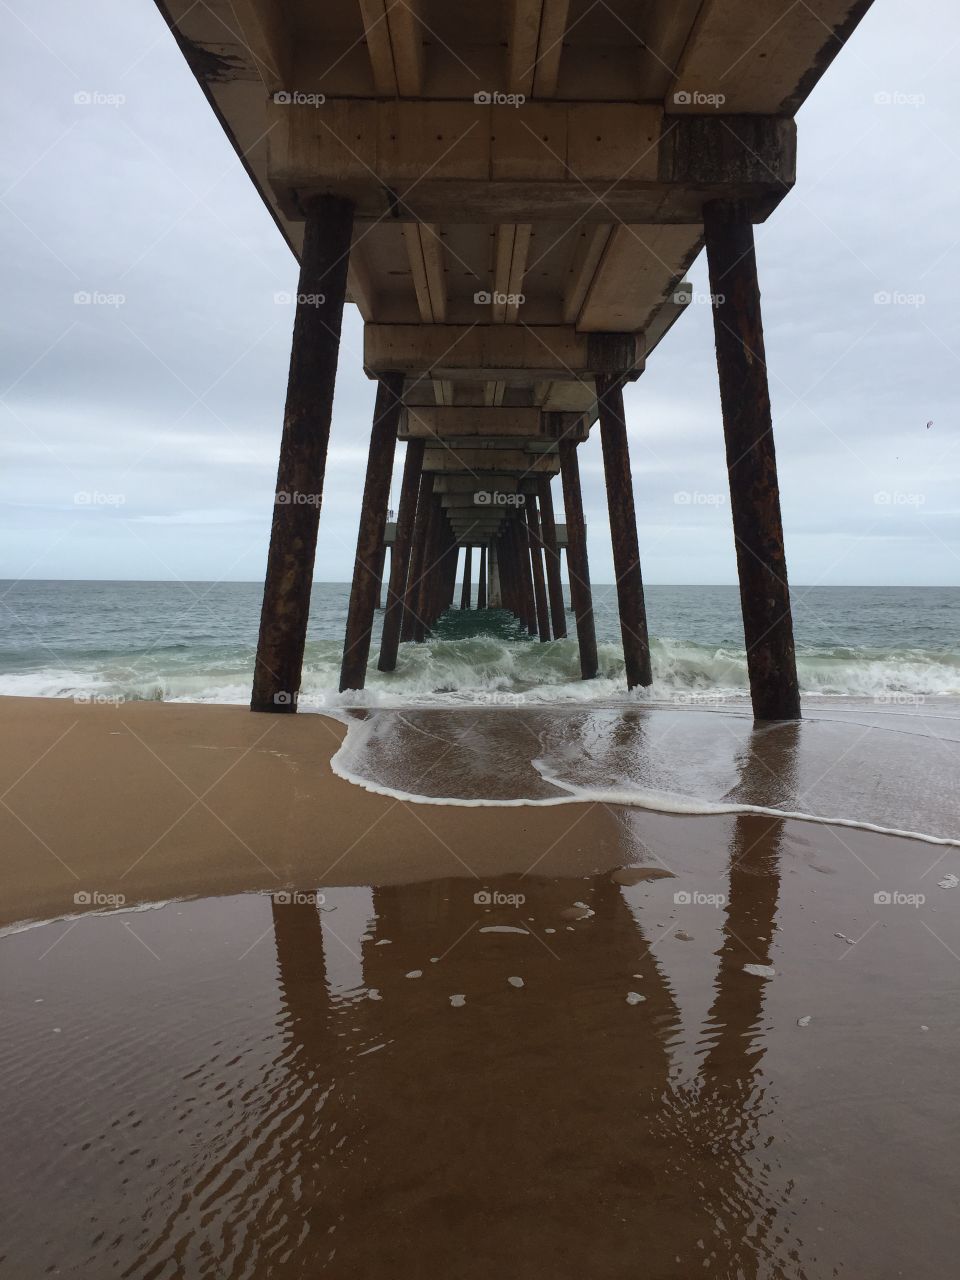 Under the pier, new perspective 